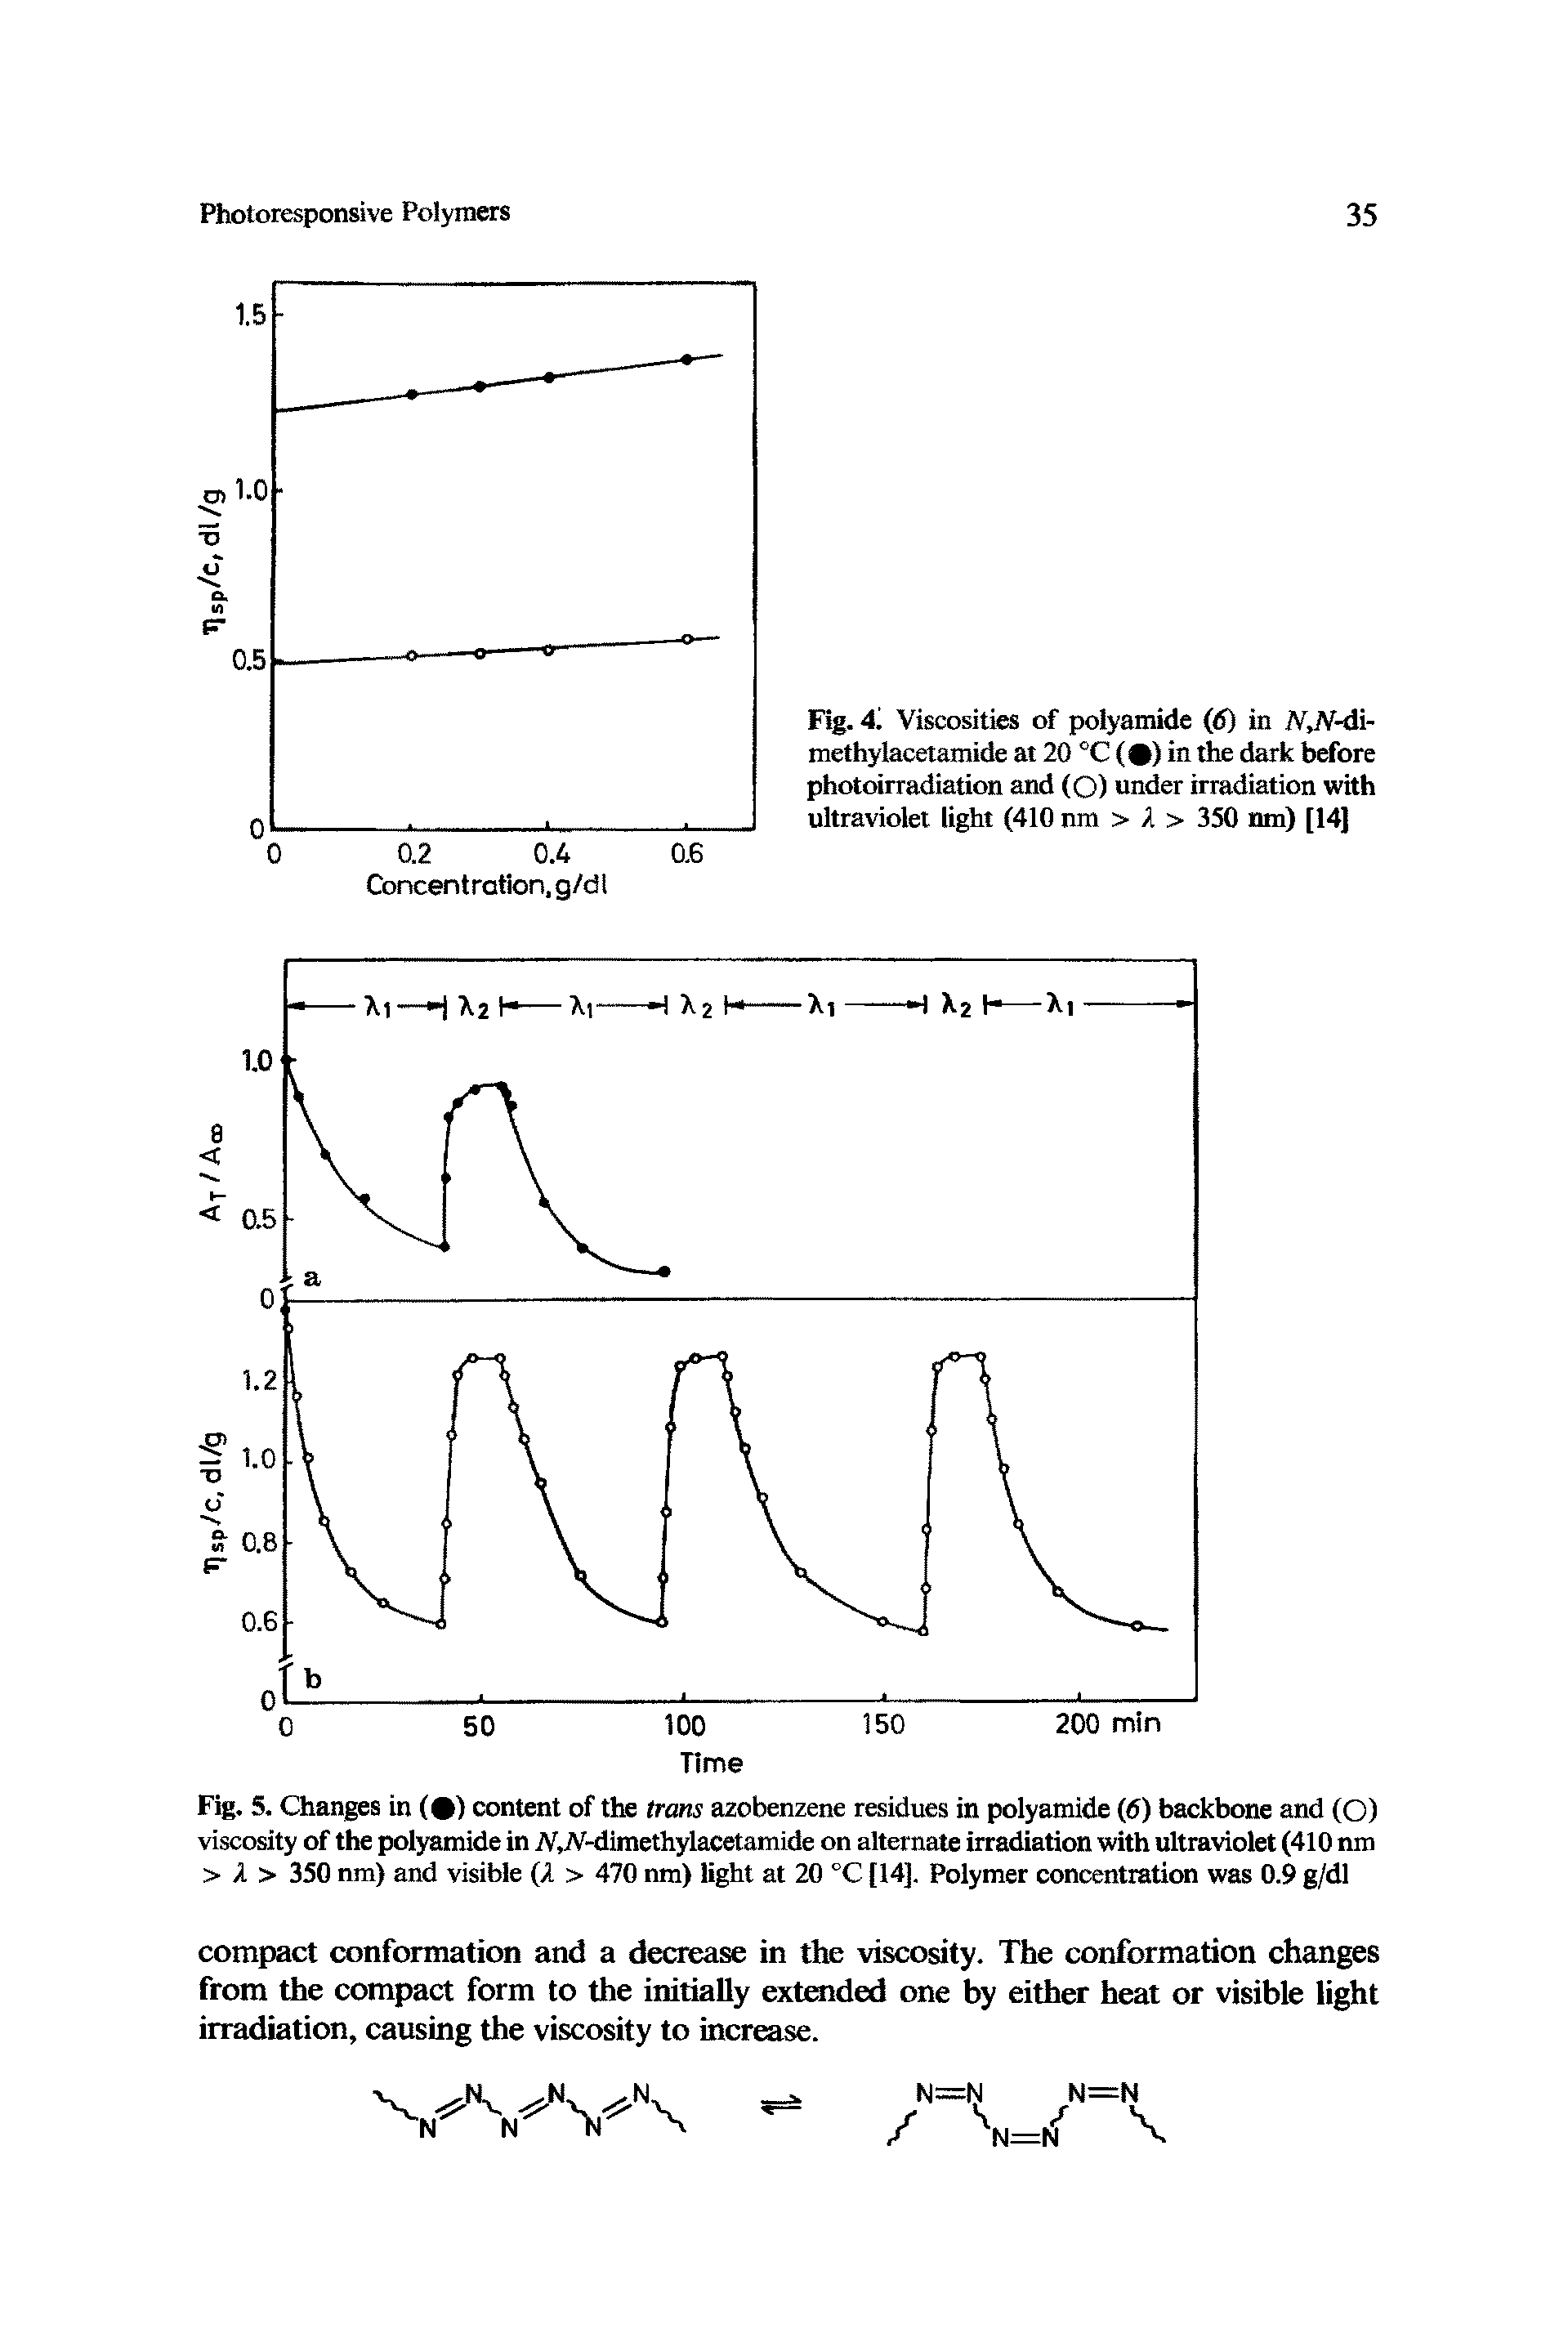 Fig. 5. Changes in ( ) content of the trans azobenzene residues in polyamide (6) backbone and (O) viscosity of the polyamide in V,V-dimethylacetamide on alternate irradiation with ultraviolet (410 nm > A > 350 nm) and visible (A > 470 nm) light at 20 °C [14], Polymer concentration was 0.9 g/dl...